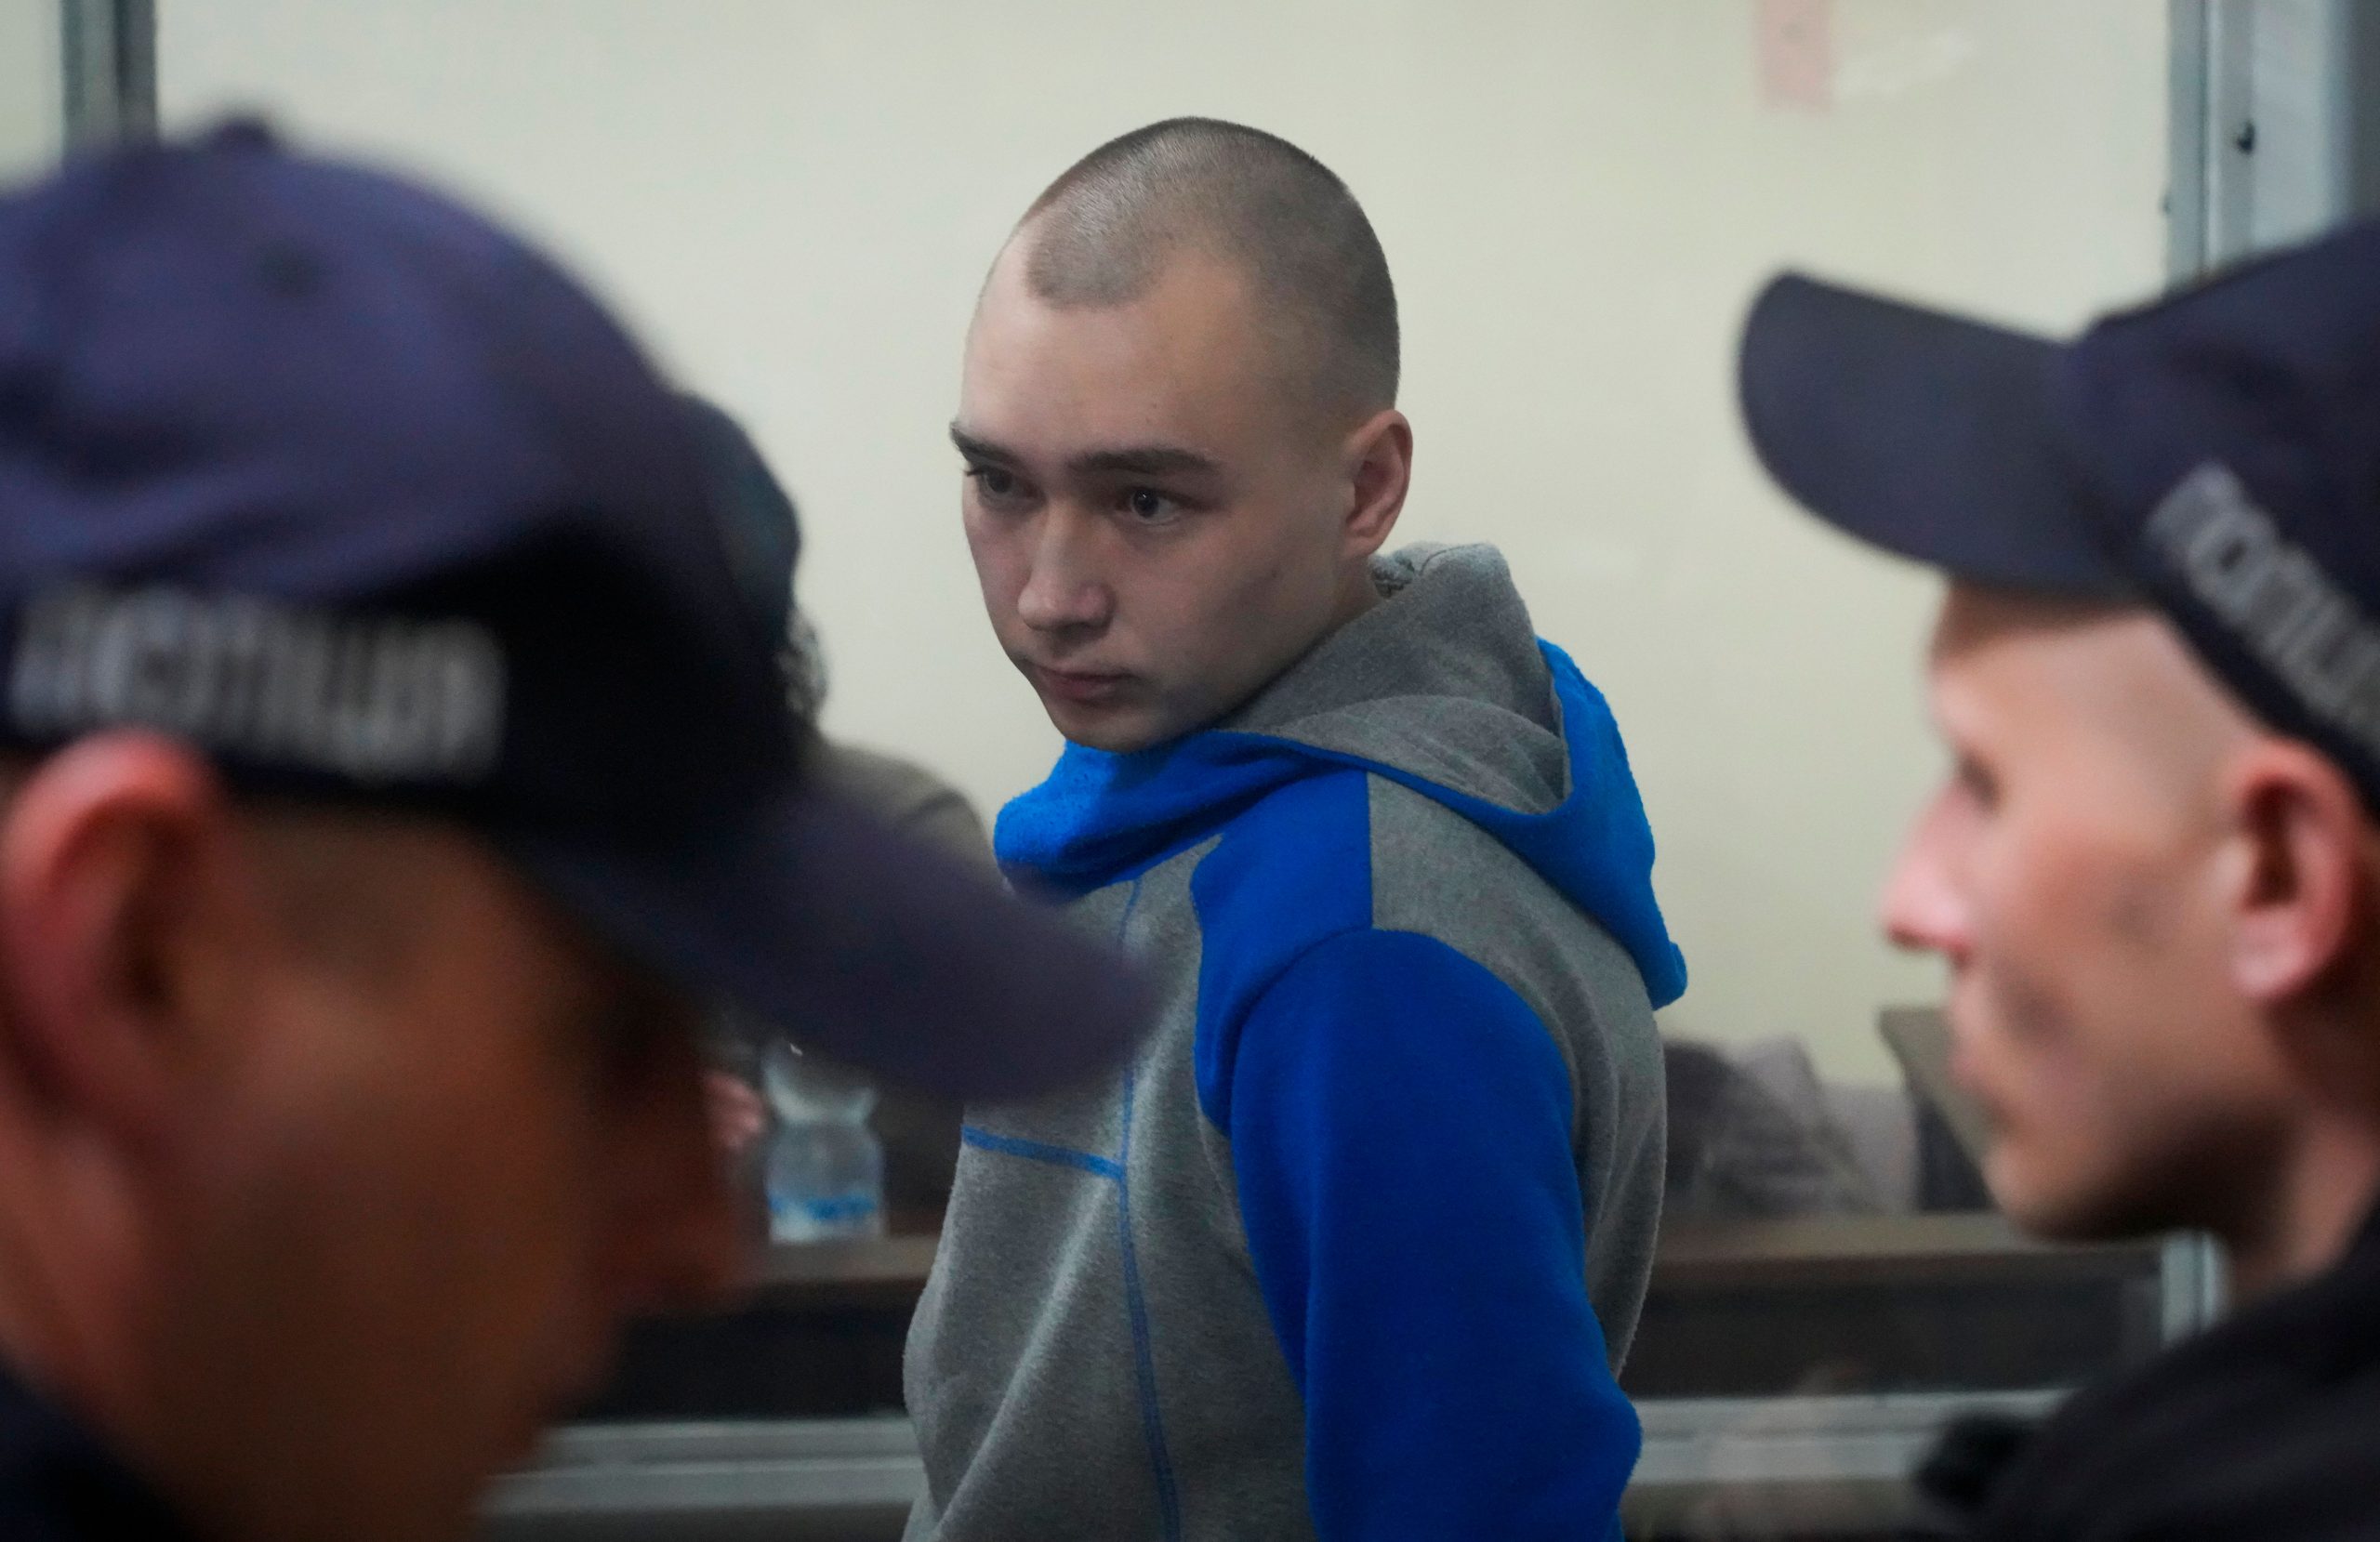 Russian soldier who pled guilty in war crime trial asks for ‘forgiveness’